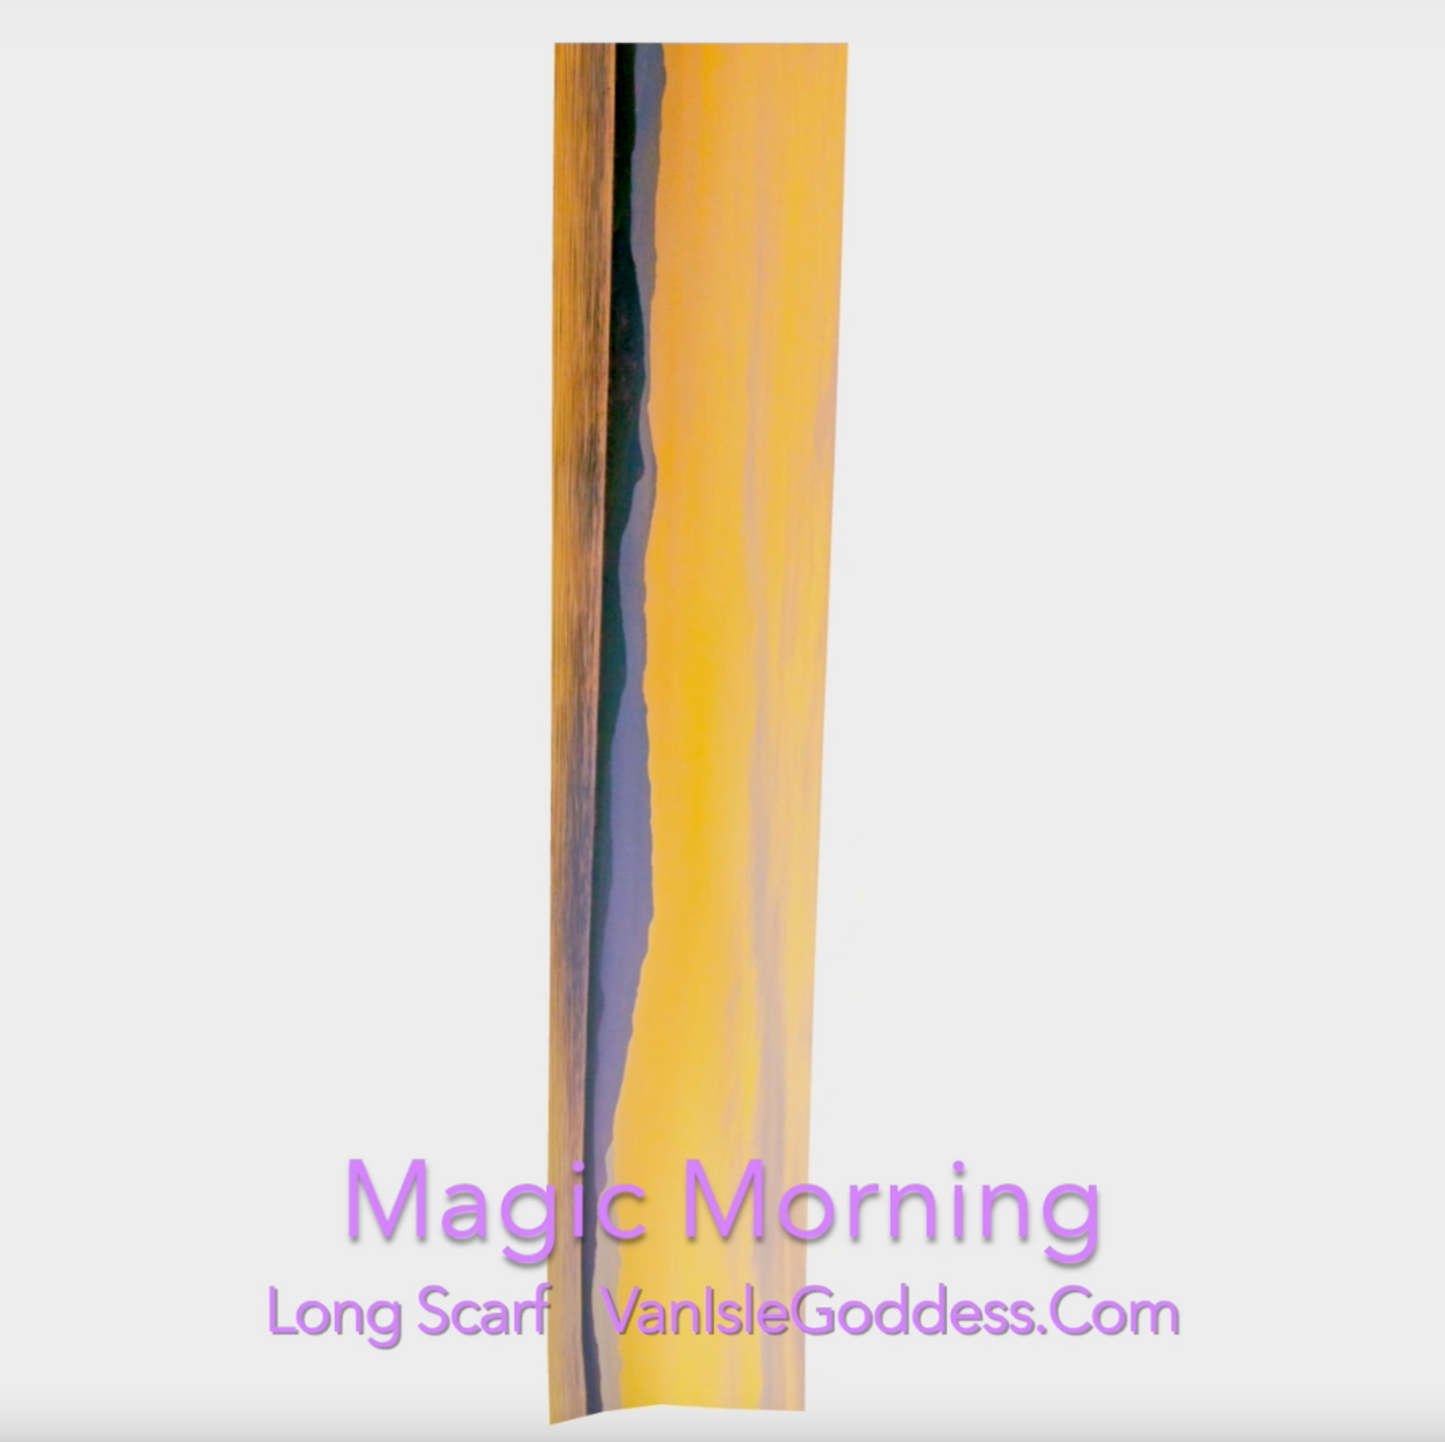 Magic Morning Long Scarf is printed using a photograph of Parksville Beach by Roxy Hurtubise.  The scarf is shown full length to show the full image.